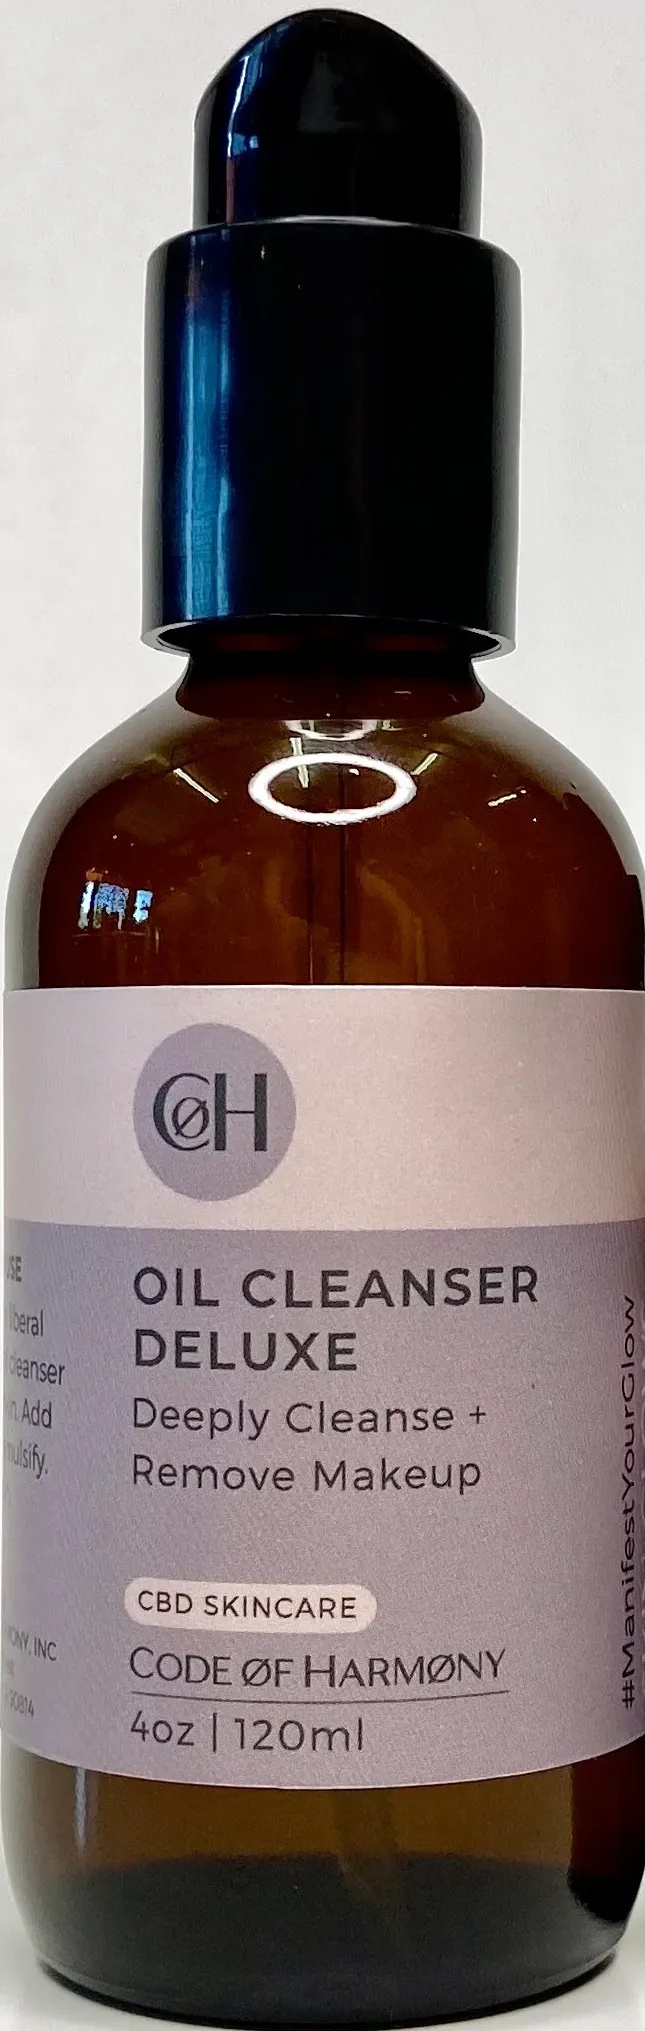 Code of Harmony Oil Cleanser Deluxe